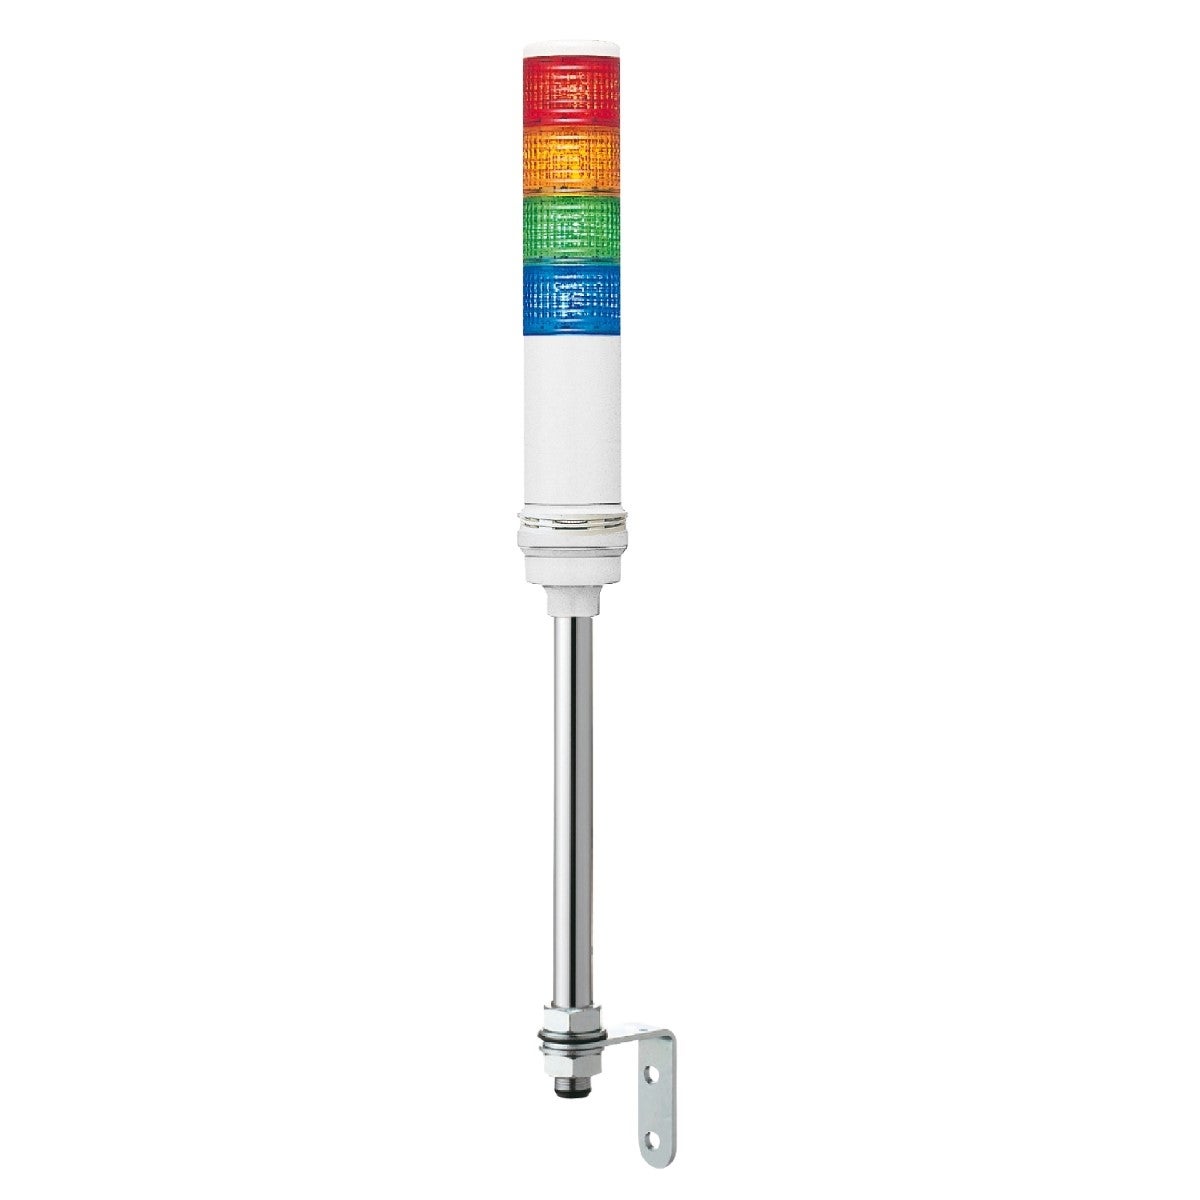 Harmony XVC, Monolithic precabled tower light, plastic, red orange green blue, Ø60, tube mounting, steady or flashing, buzzer, IP23, 24 V AC/DC